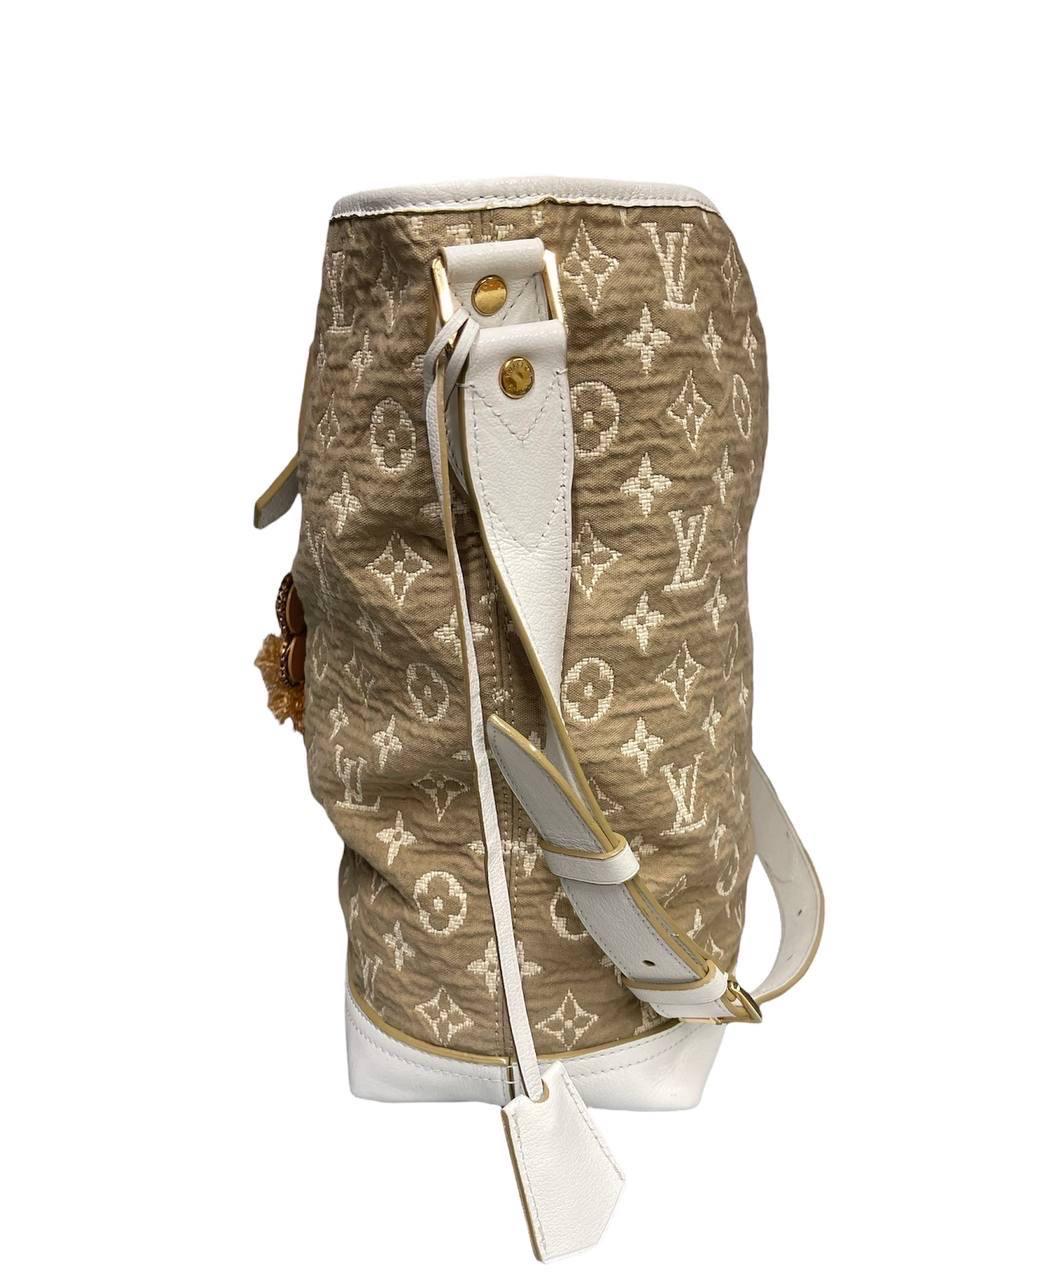 Louis Vuitton signed bag, limited edition, besace model made of sand-colored monogram print fabric.

On the front it has a pocket with uncle closure, and hand-made floral details.

Equipped with adjustable leather shoulder strap and gold